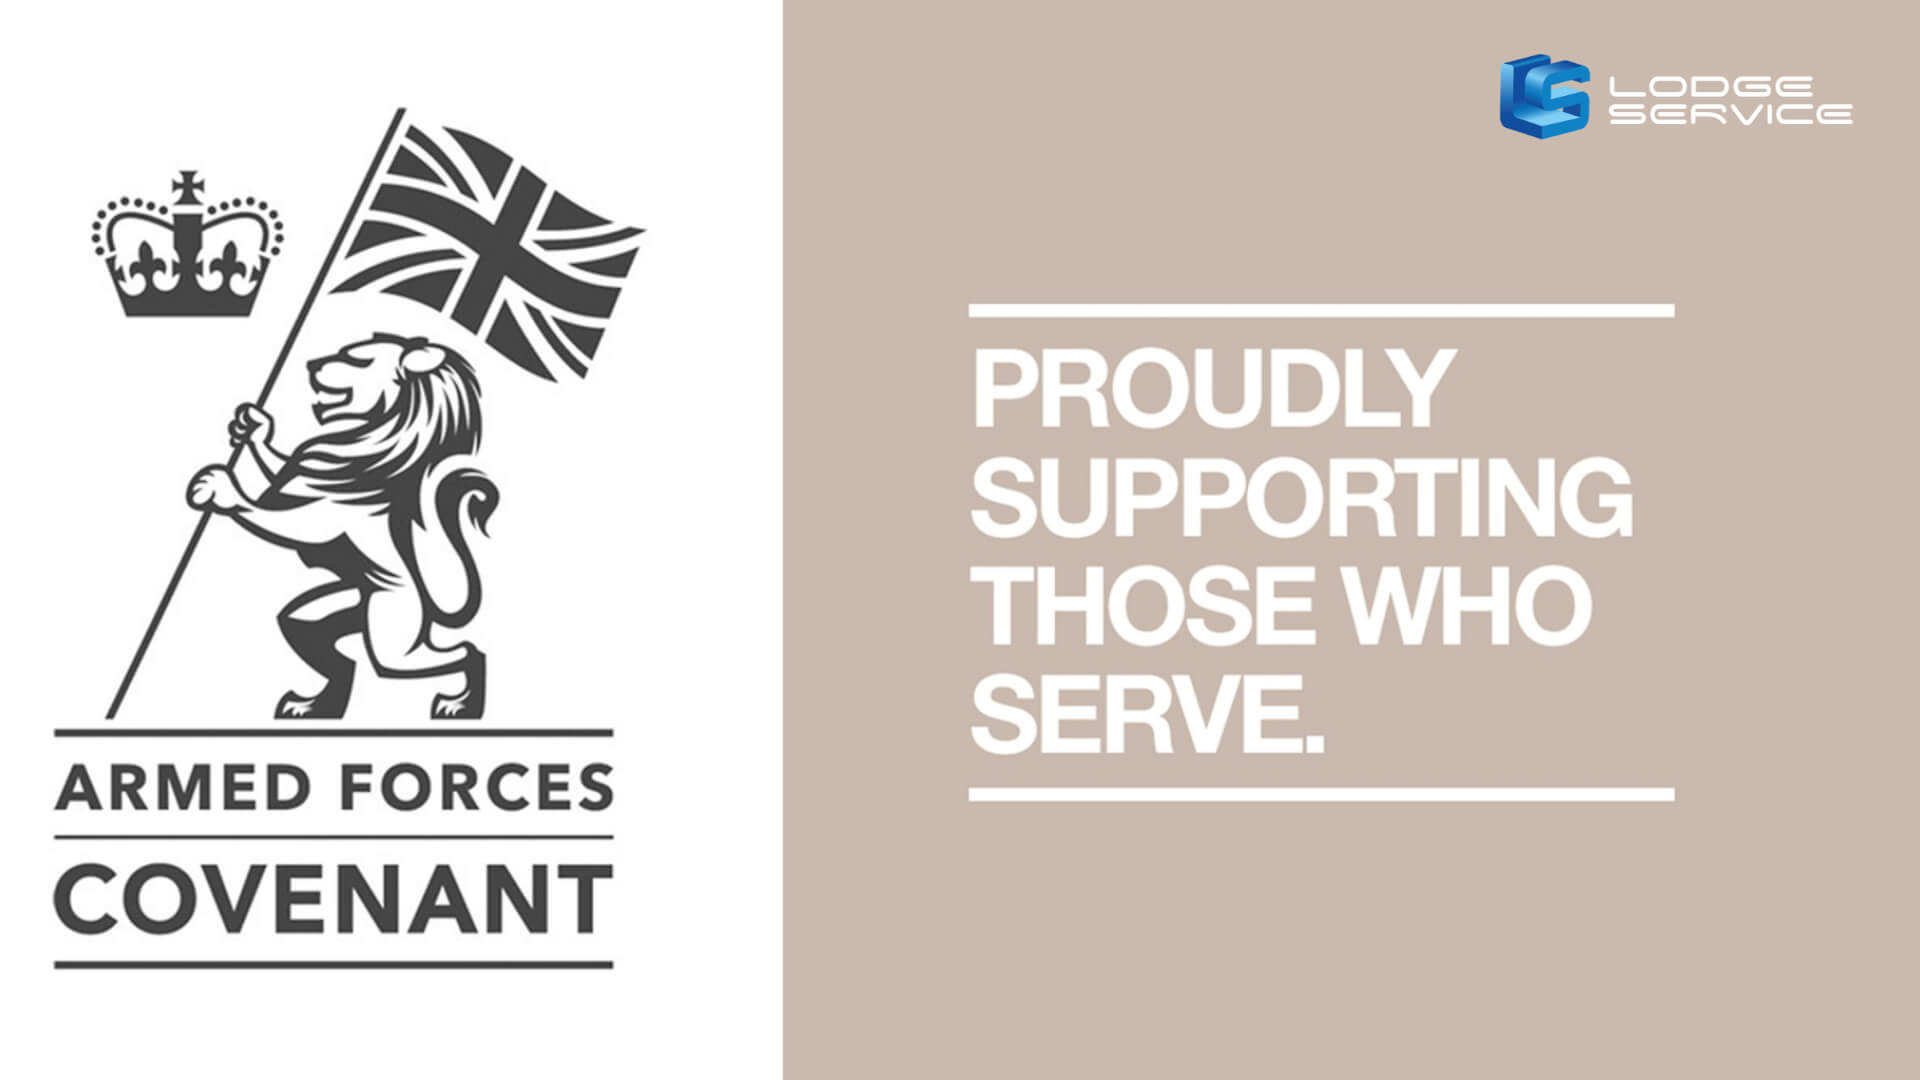 Lodge Service Joins the Armed Forces Covenant